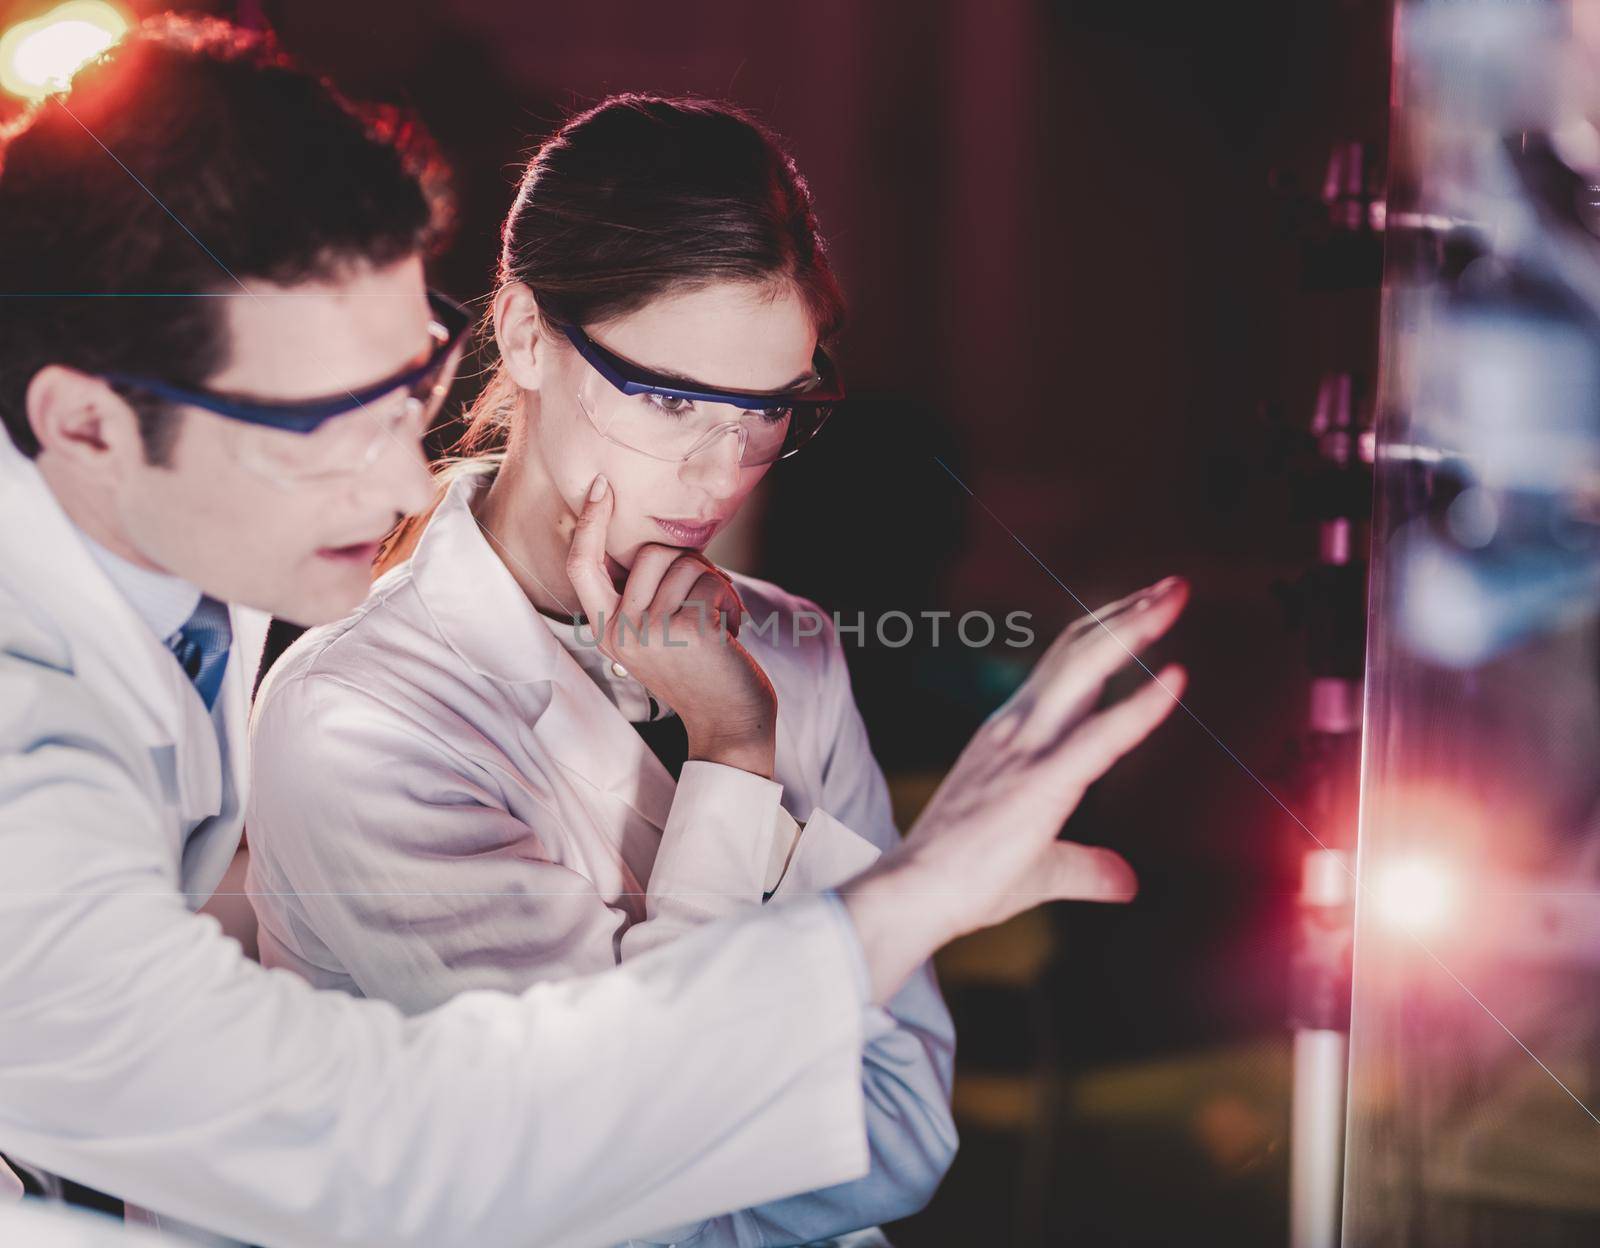 Portrait of a focused electrical engineering researchers in their working environment checking the phenomenon of breaking laser beam on the glass surface.